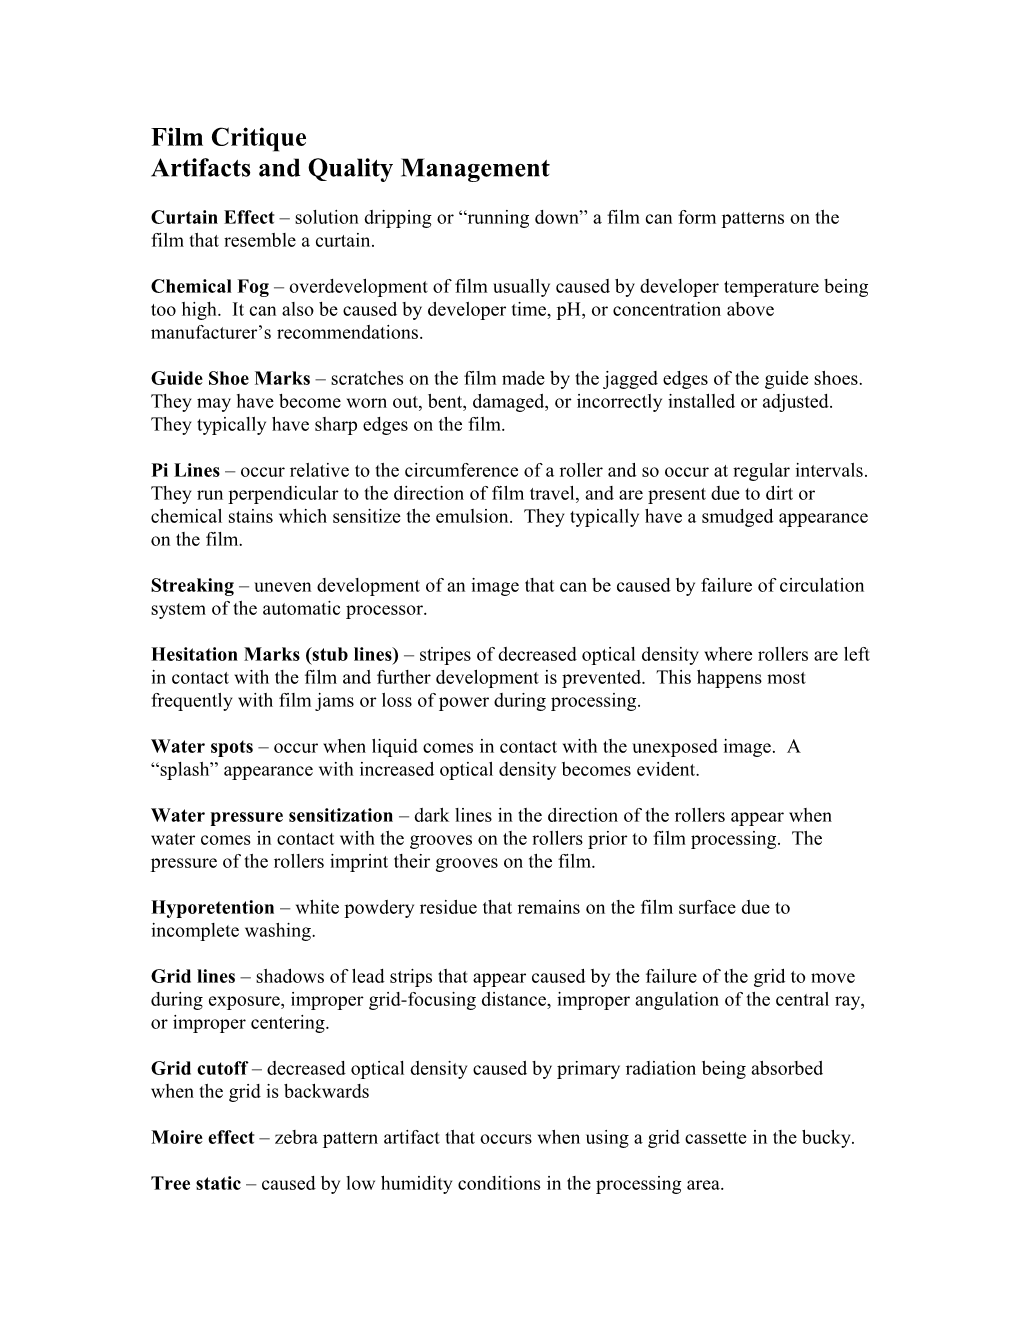 Artifacts and Quality Management